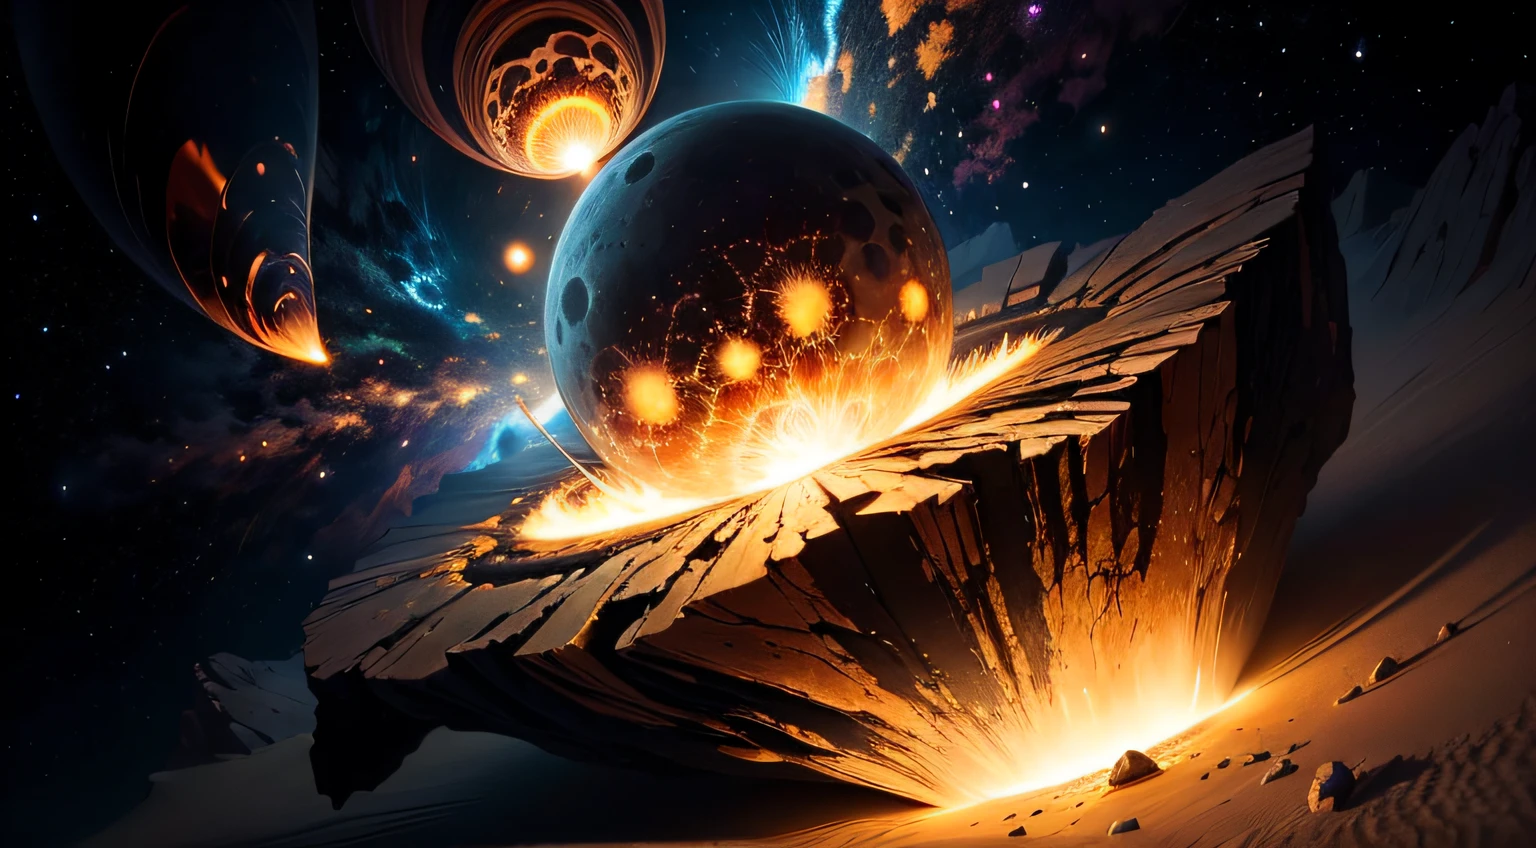 Draw a drawing that starts with a cosmic scene of a star explosion, showing glowing carbon particles, oxygen and iron being expelled. In the center of the explosion, a golden glow begins to form, representando a origem do ouro. The image then transitions to Earth, illustrating the geological process with deep layers and extreme pressures that shape golden formations.